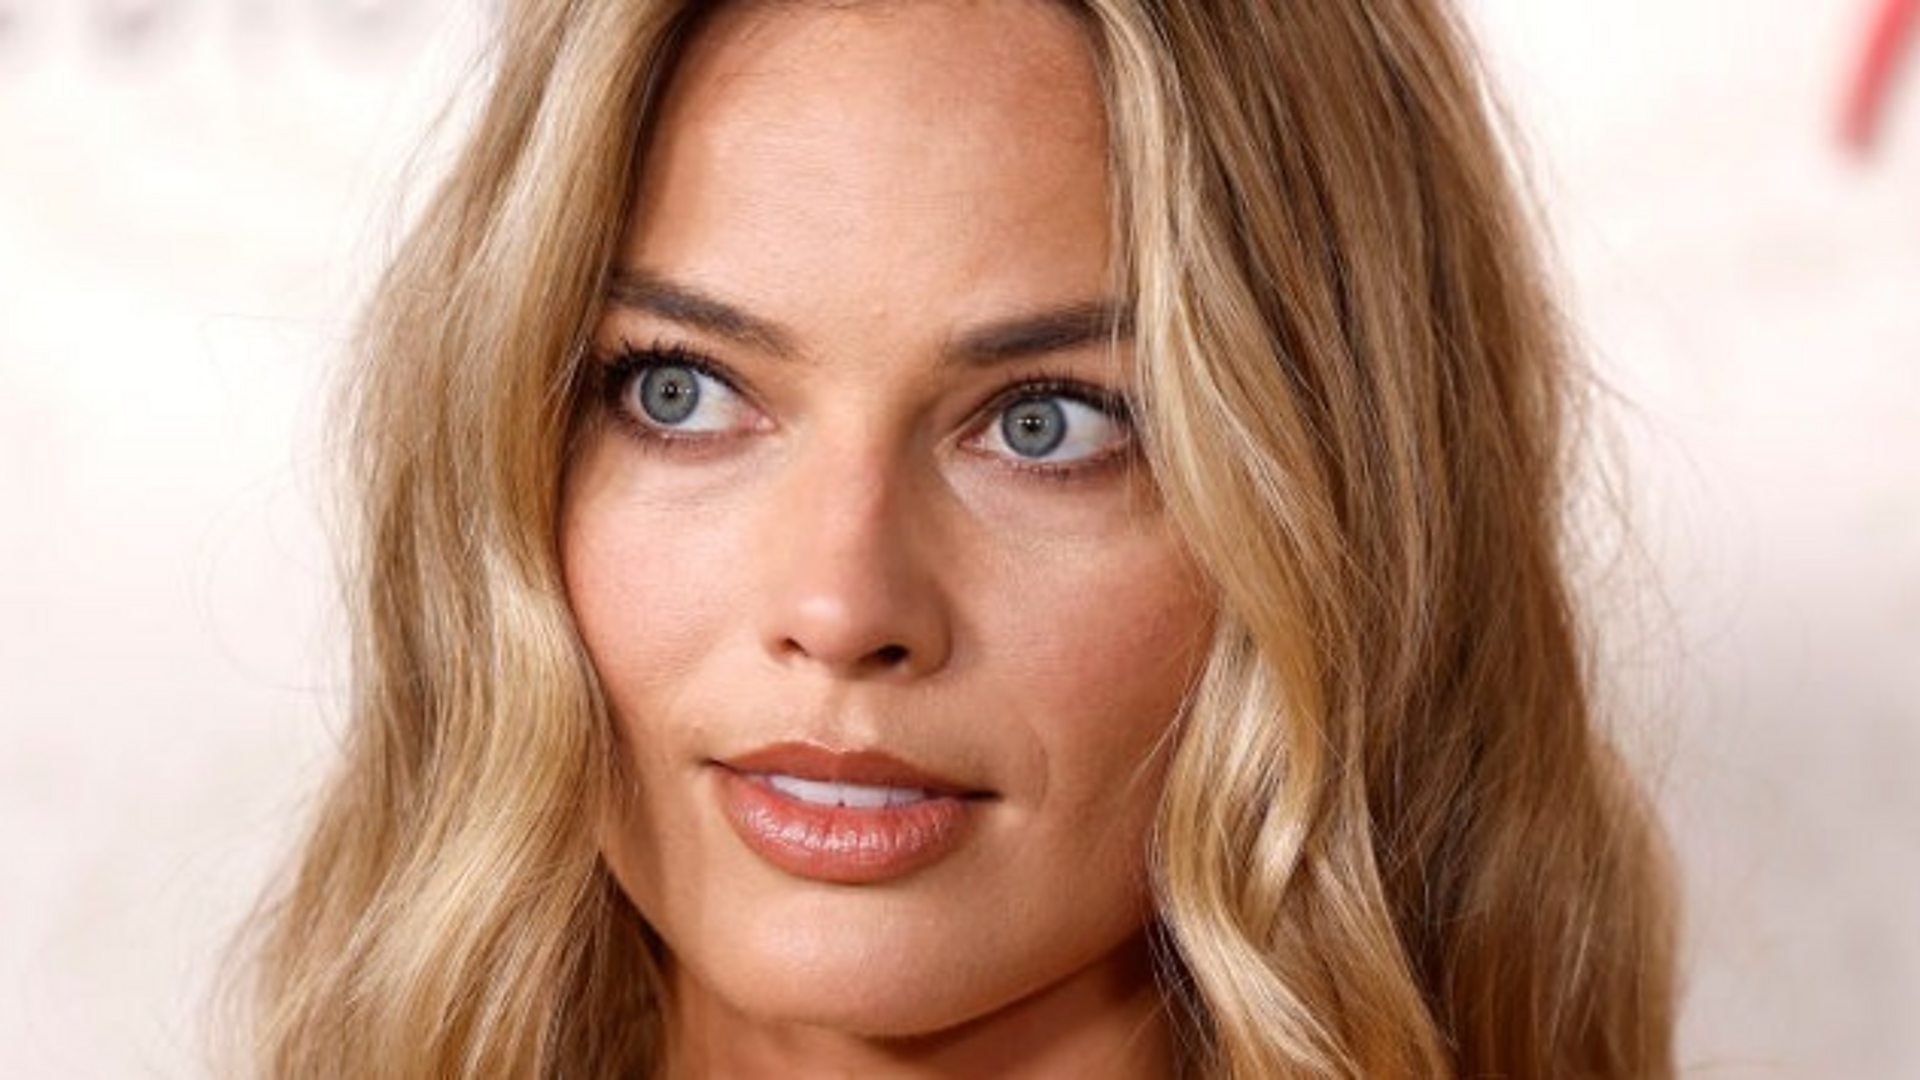 24 Hours with Margot Robbie - Margot Robbie Shares Her Daily Routine